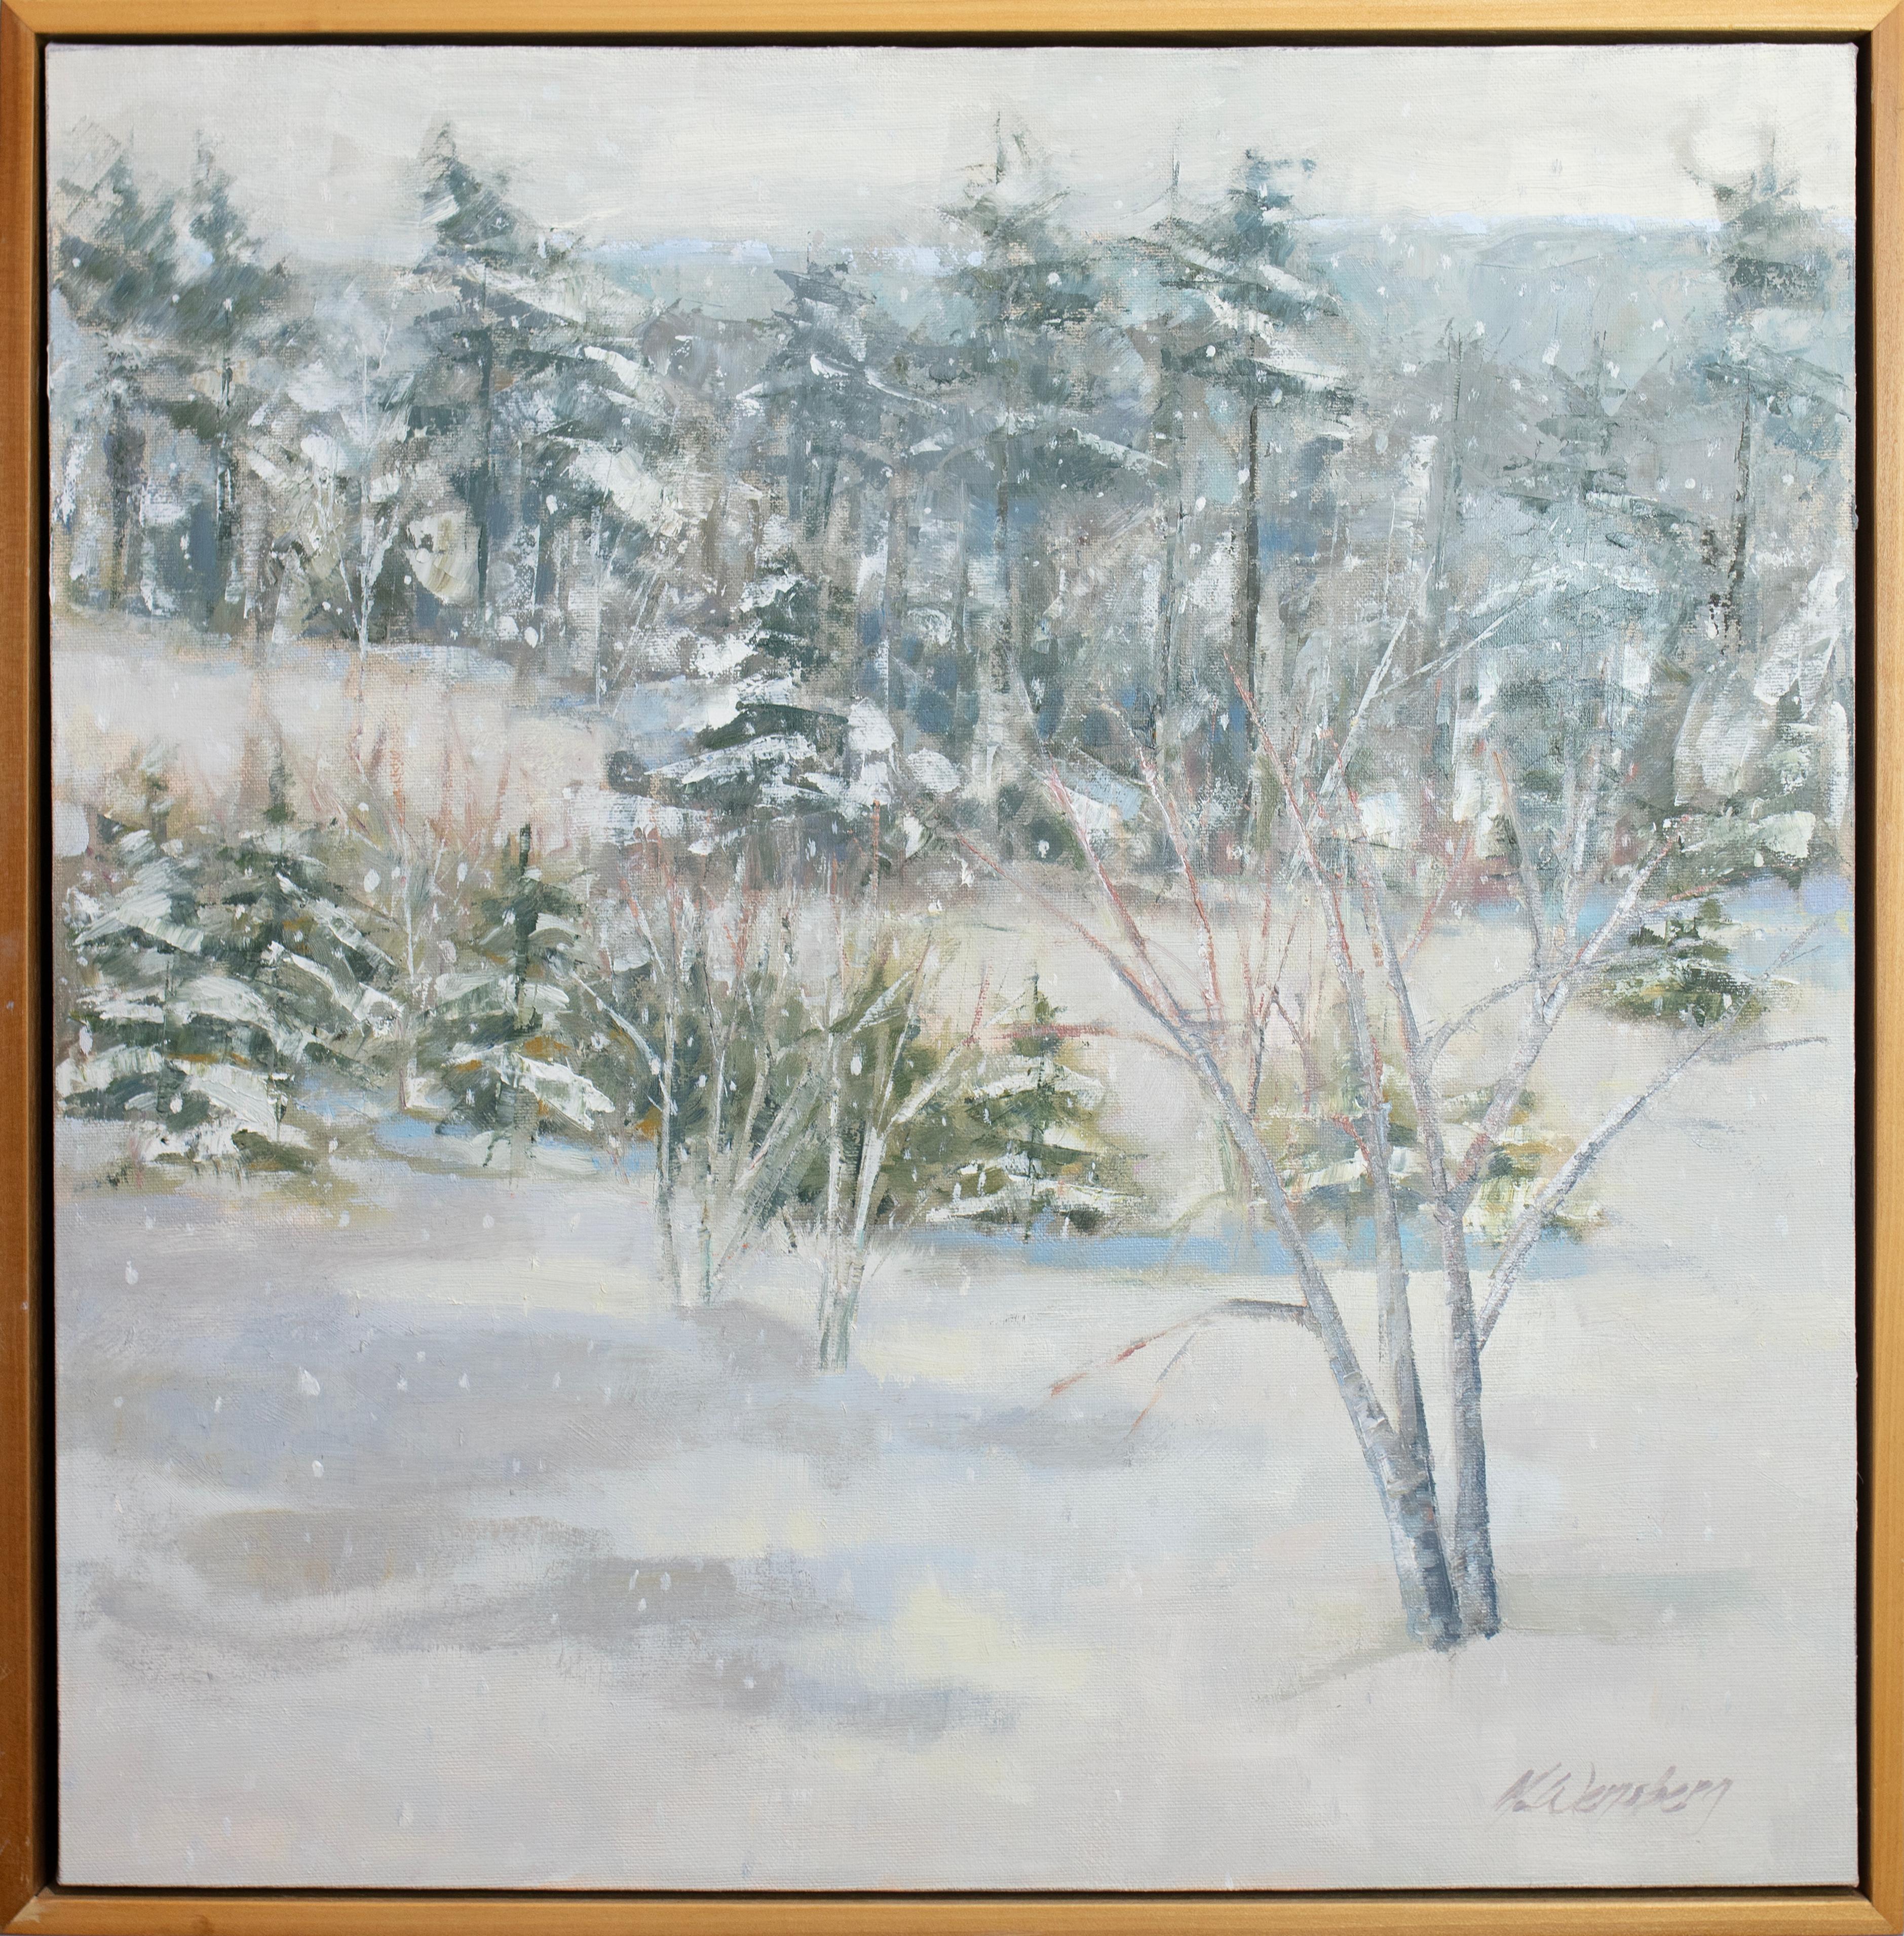 This impressionistic winter landscape painting by Molly Doe Wensberg features a cool blue, green, and white palette. The artist captures a landscape scene with trees covered and surrounded by lush snow. The painting itself measures 20" x 20" and 21"